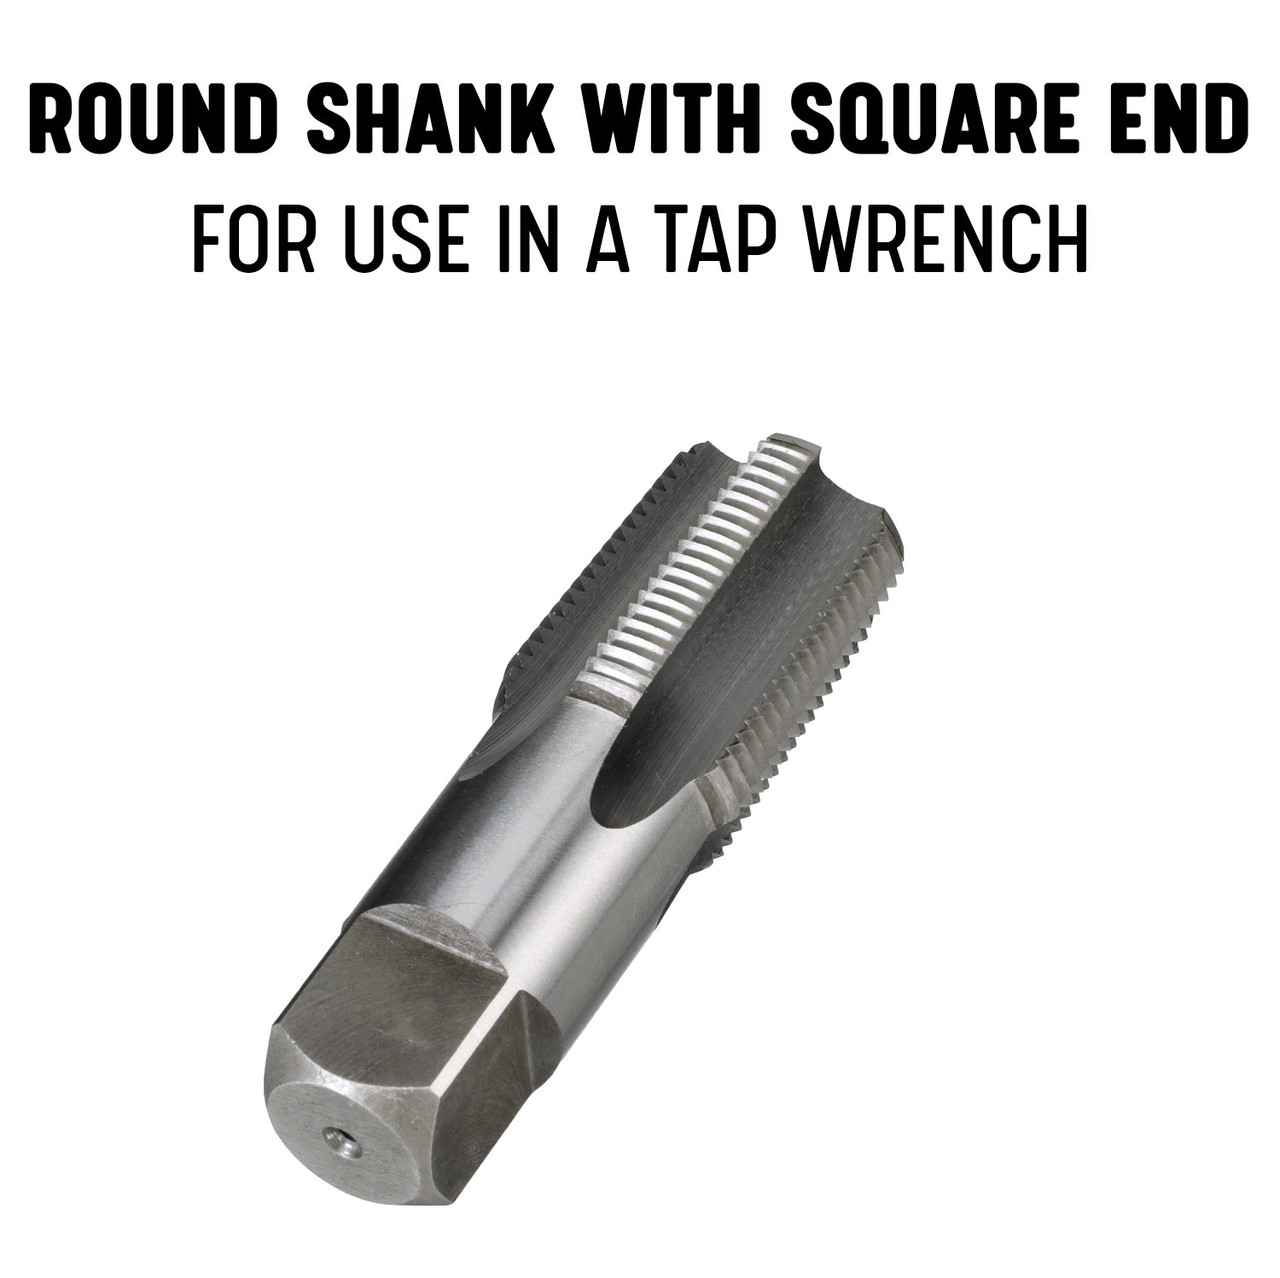 Drill America DWTPT Series Qualtech Carbon Steel Pipe Tap， Uncoated  (Bright) Finish， Round with Square End Shank， 3-8 NPT (Pack of 1) by Am  直売半額